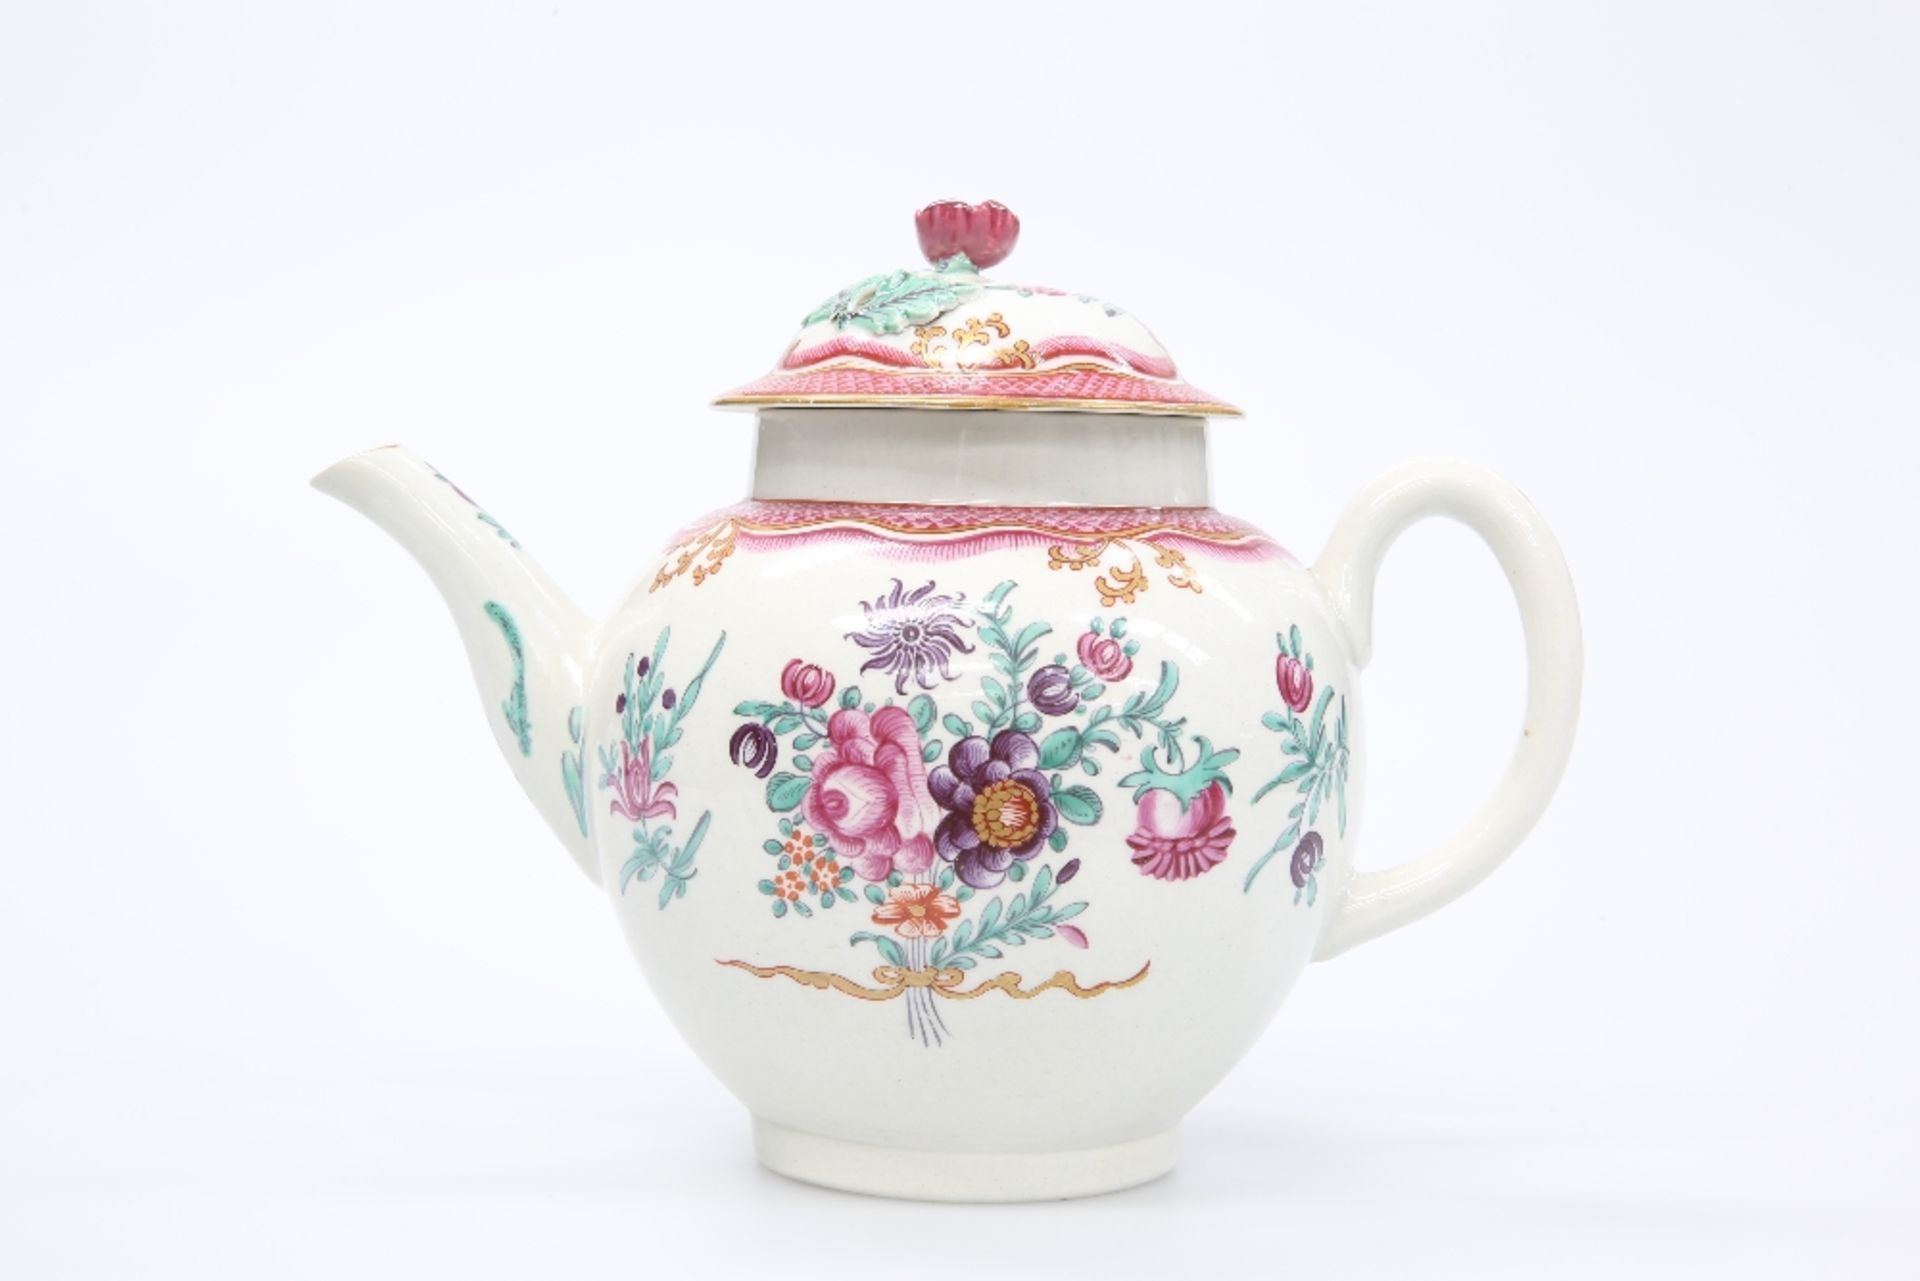 A WORCESTER PORCELAIN TEAPOT IN CHINESE EXPORT STYLE